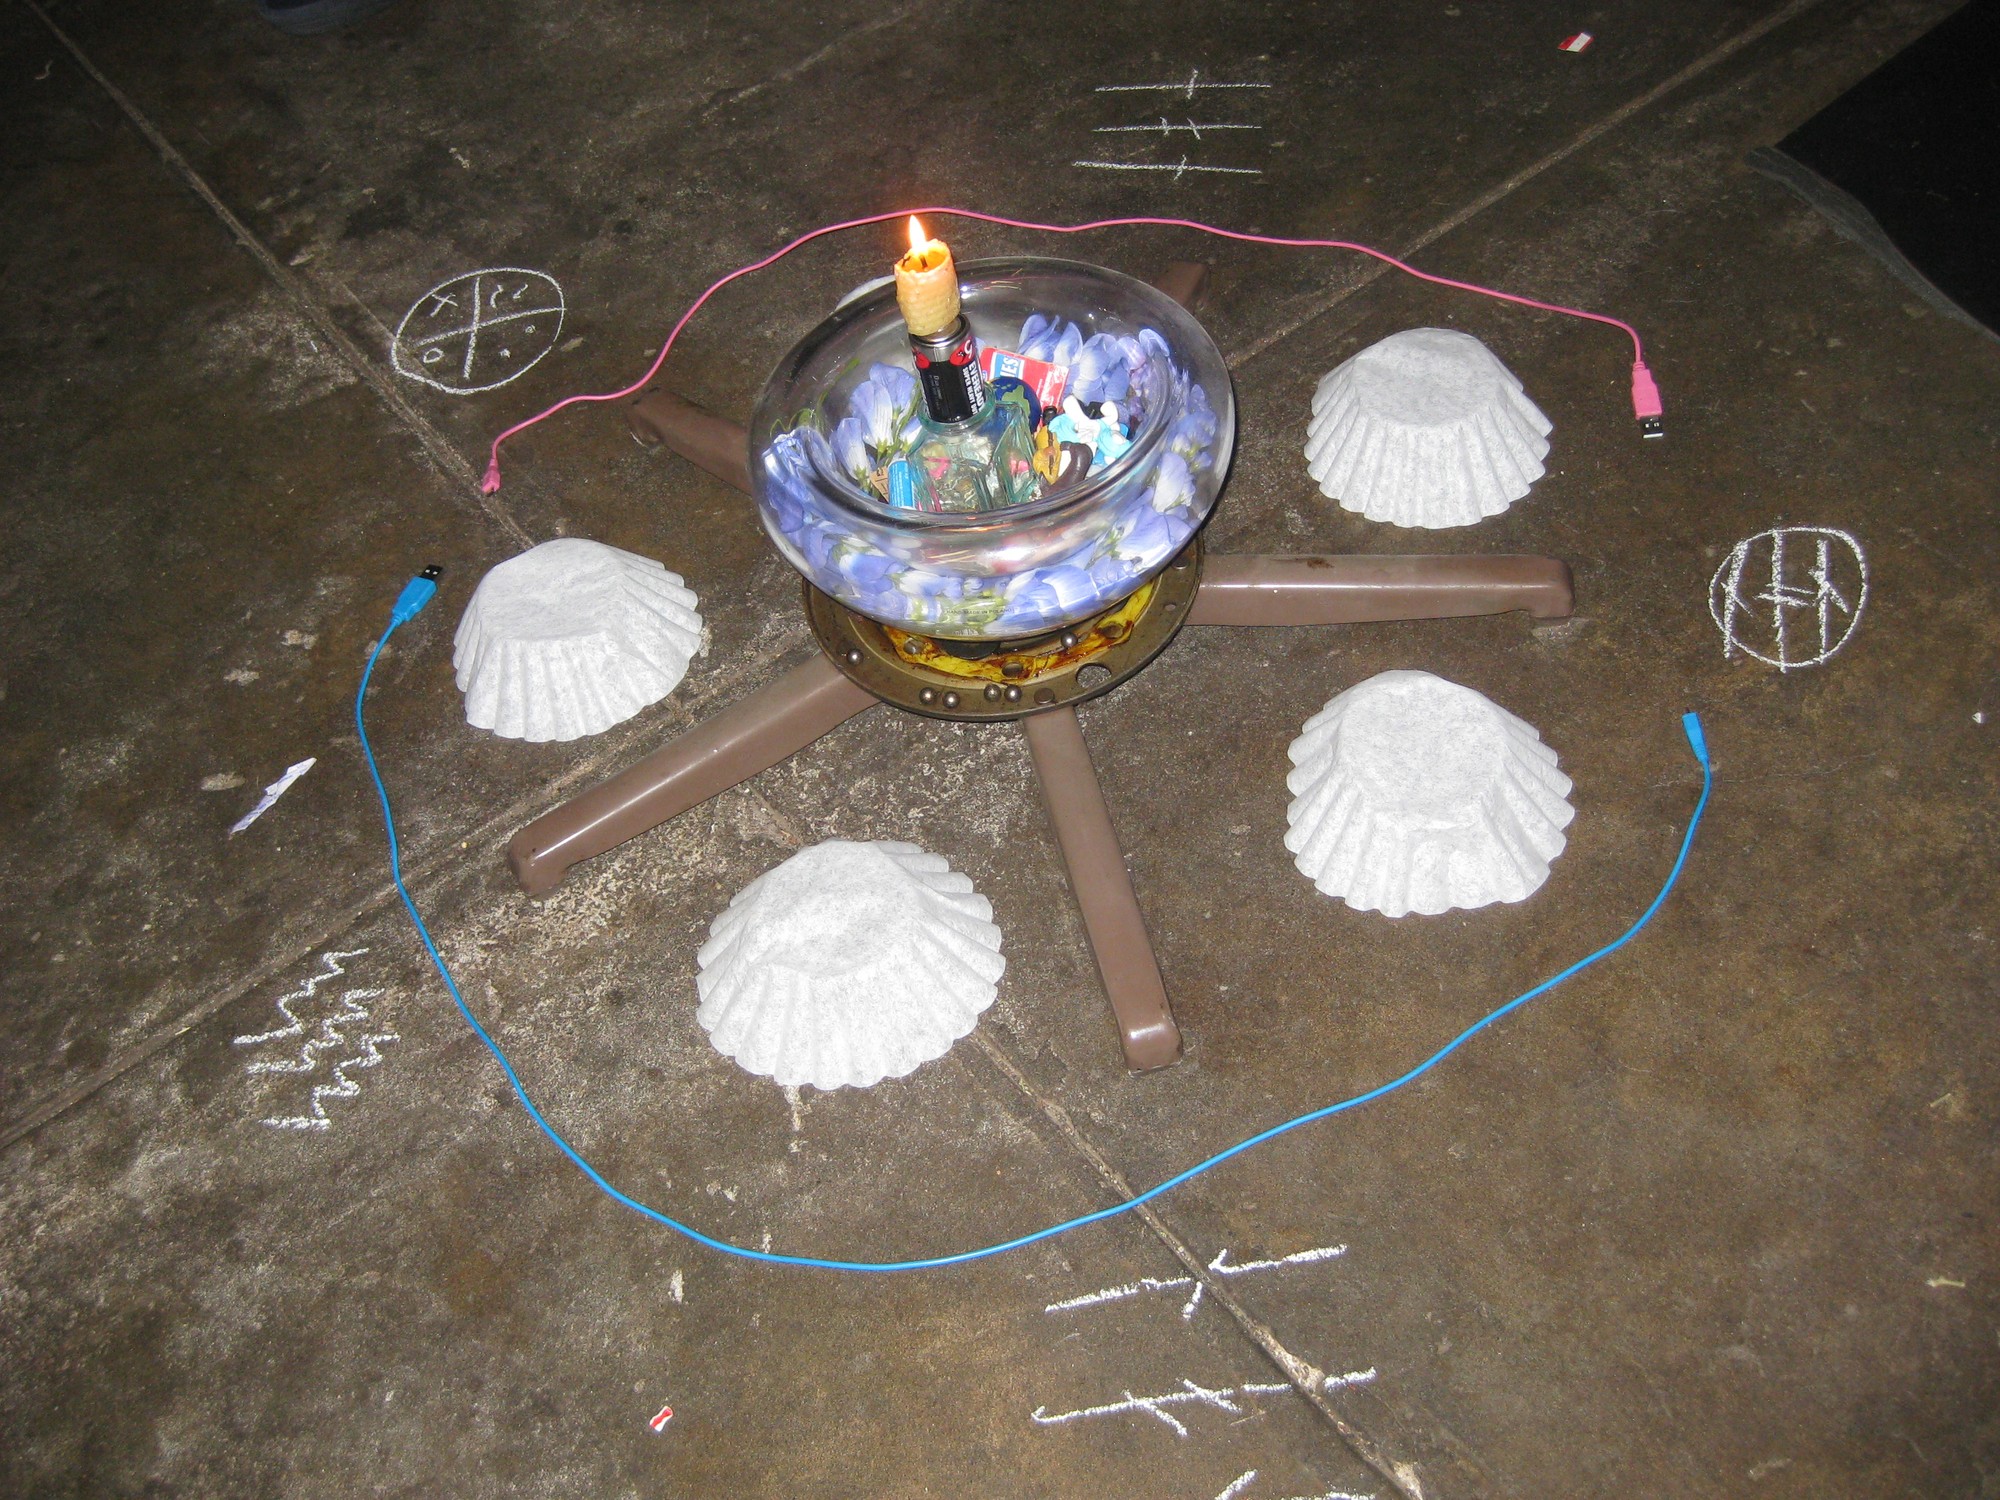 installation of manuel arturo abreu's - upside down coffee filters encircled by headphone cables, on concrete floor with chalk markings around the edits, in center is an object with candle burning